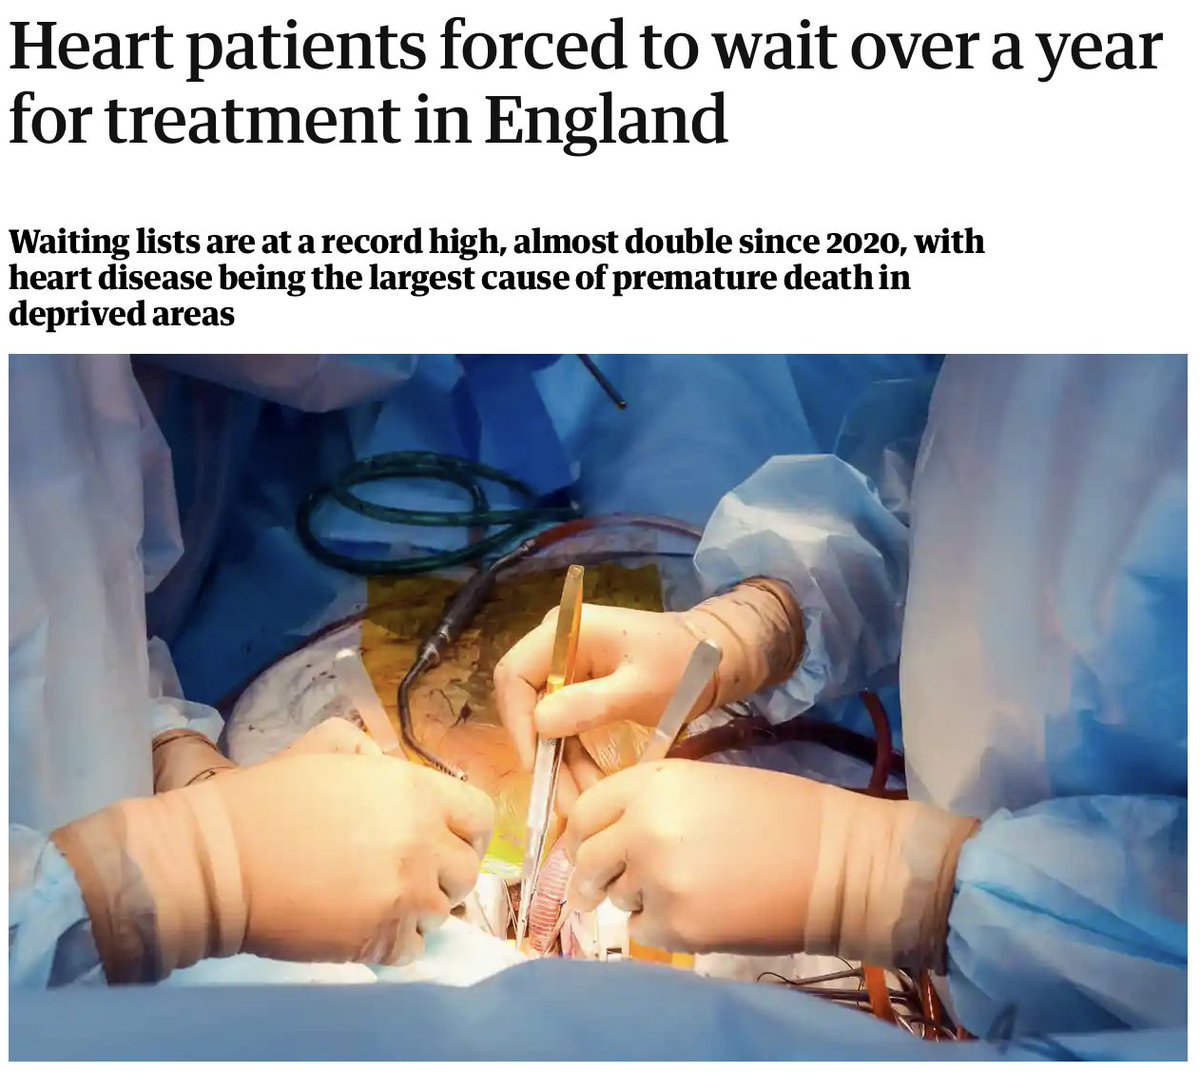 There are 414,596 people waiting for heart procedures - double the number in 2020. Of these, 10,893 have been waiting over a year. 4 years ago, that figure was just 53. This isn't inevitable, unavoidable or because the NHS is 'failing.' It is a shameful political choice.